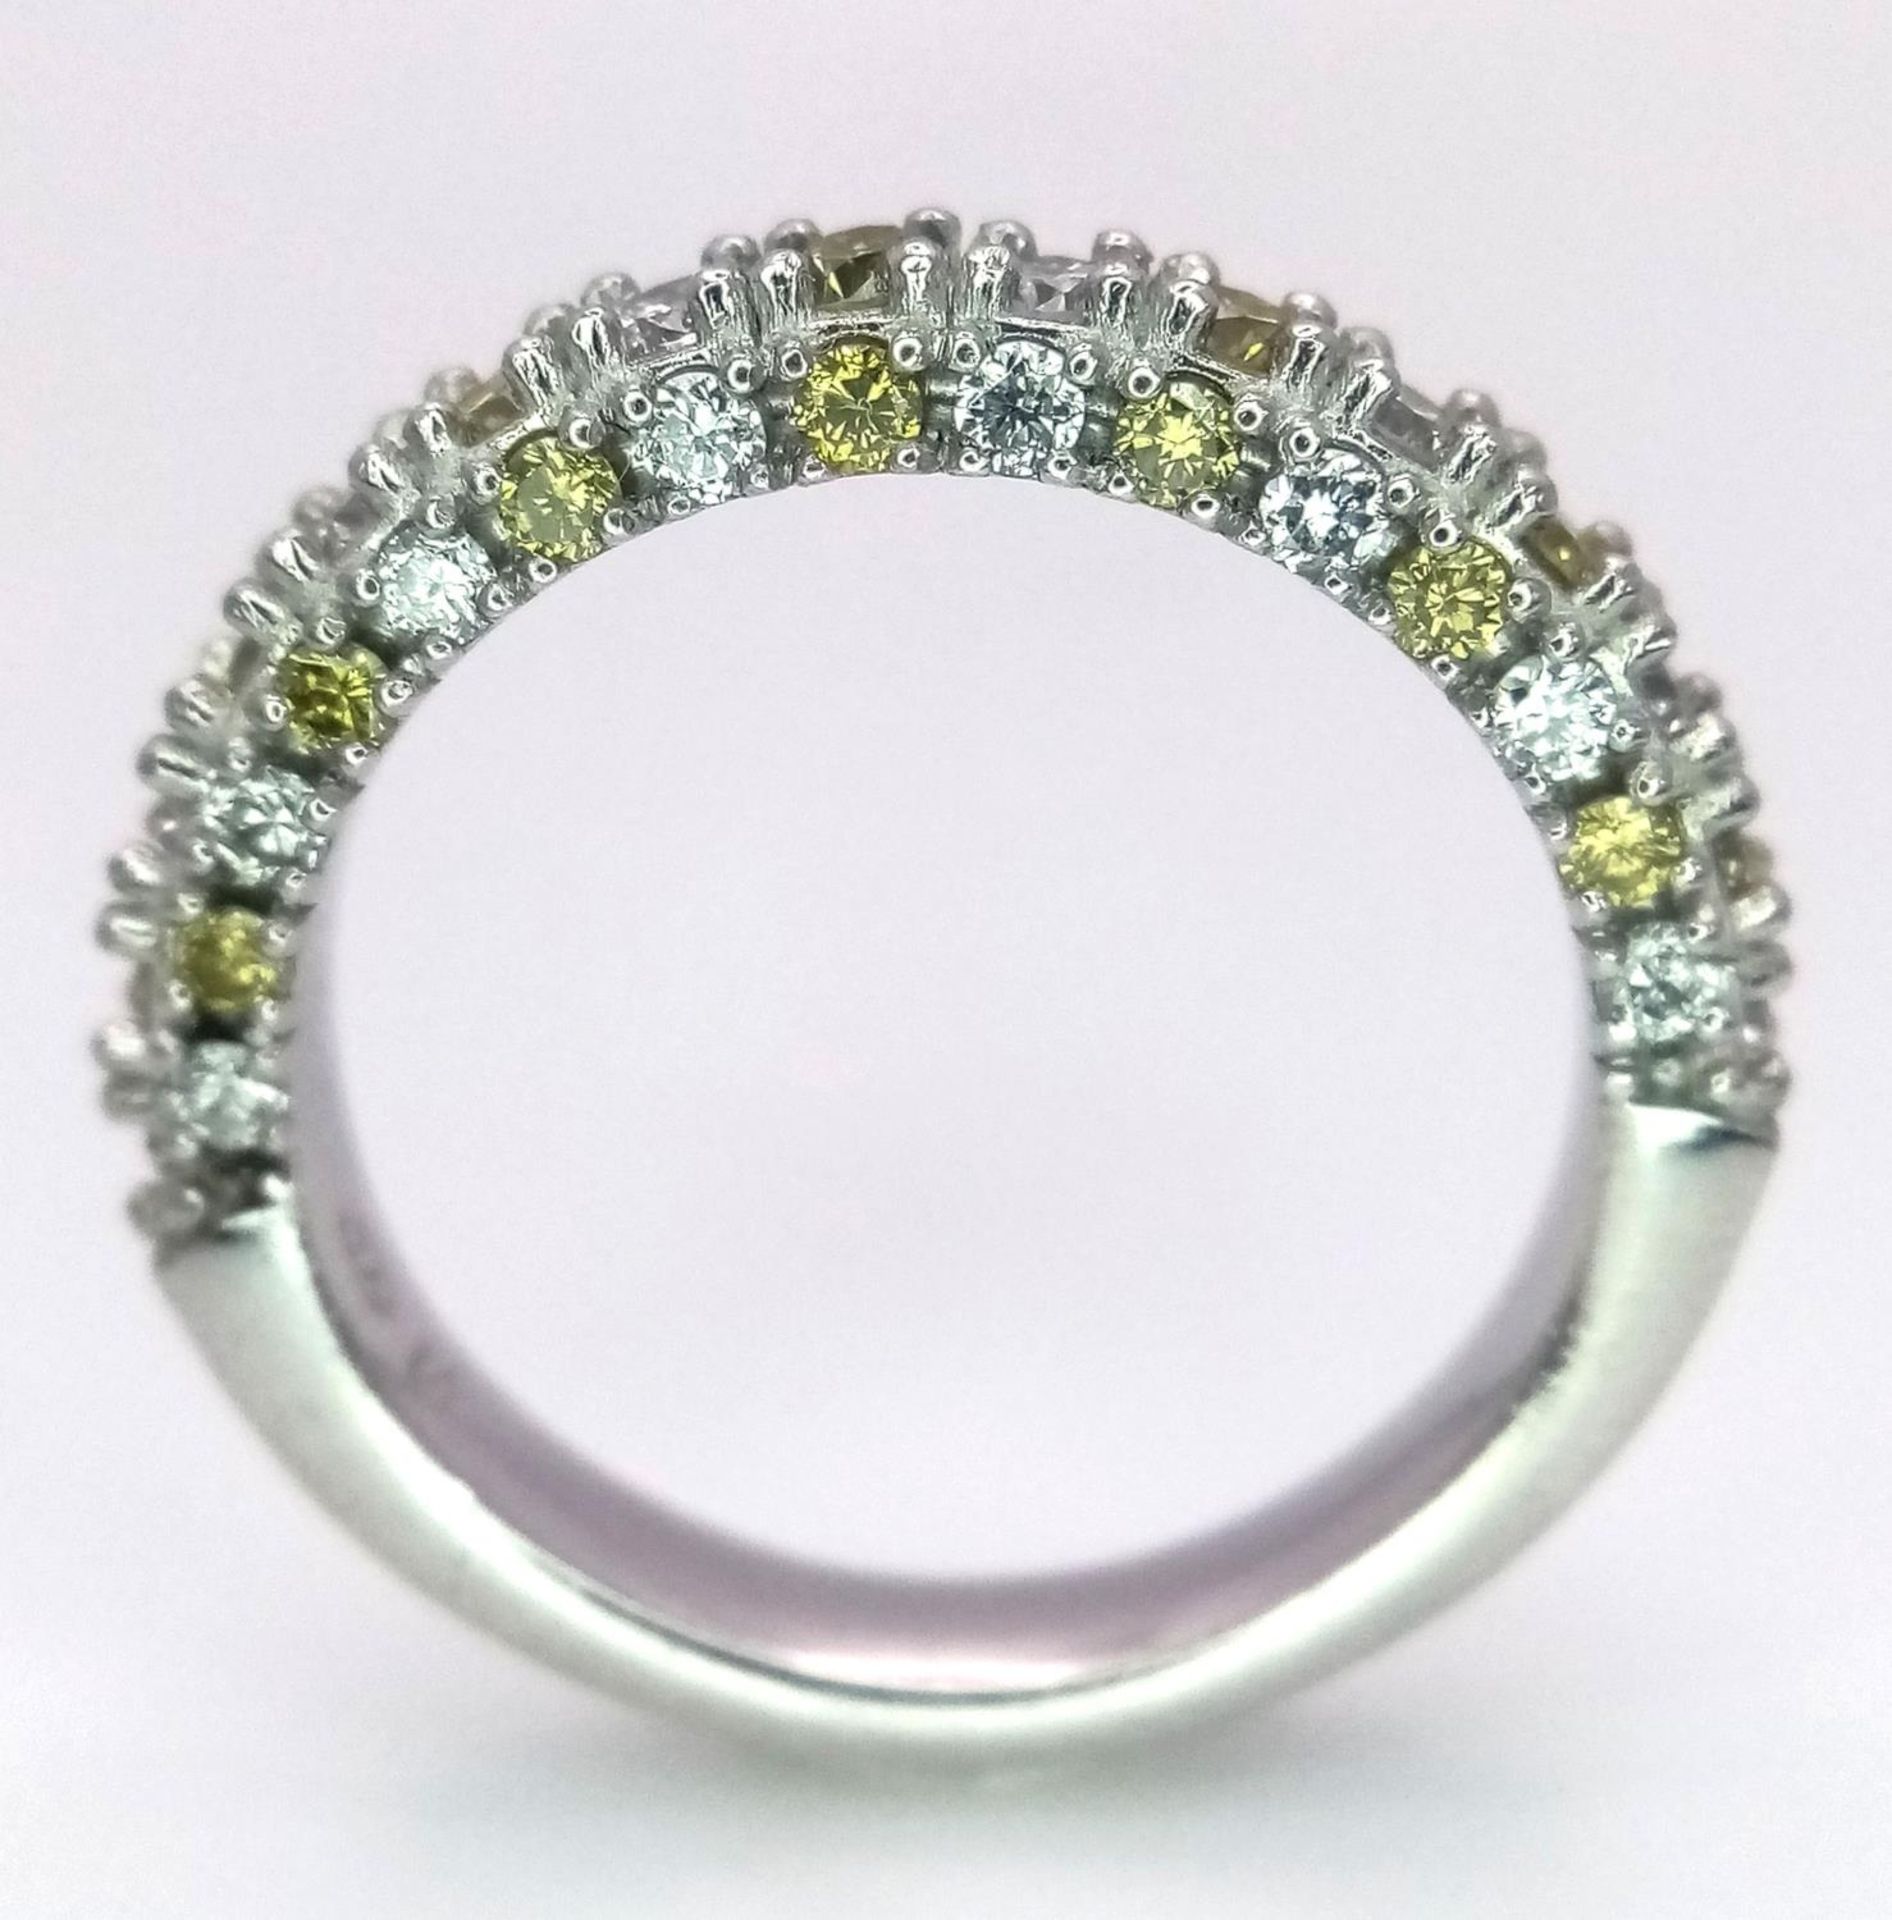 A Platinum White and Yellow Diamond Three-Sided Half Eternity Ring. Size L. 6.3g total weight. - Image 3 of 9